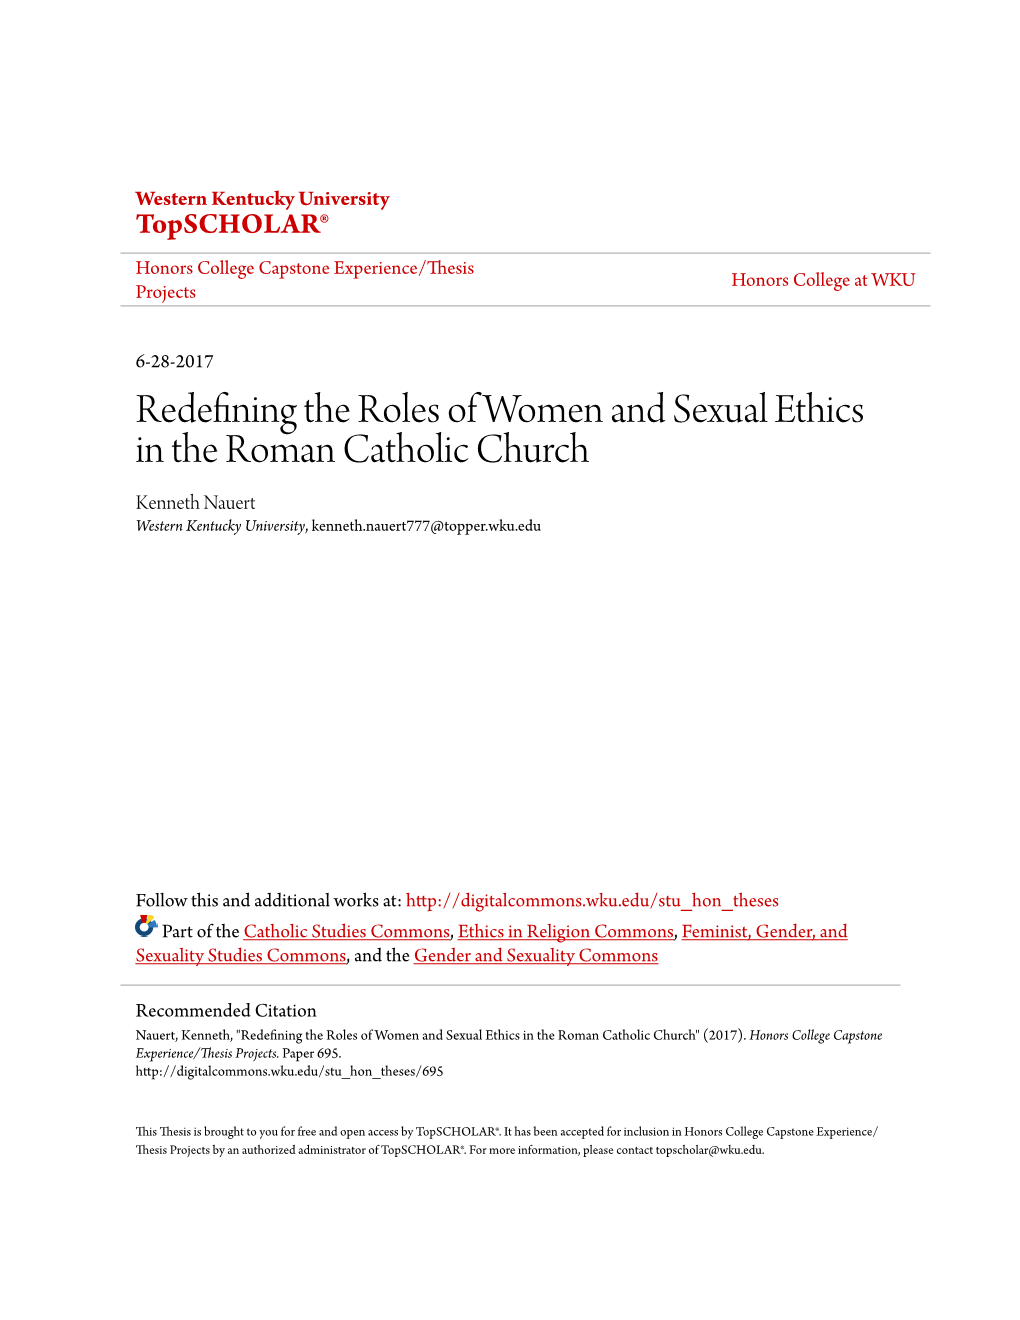 Redefining the Roles of Women and Sexual Ethics in the Roman Catholic Church Kenneth Nauert Western Kentucky University, Kenneth.Nauert777@Topper.Wku.Edu